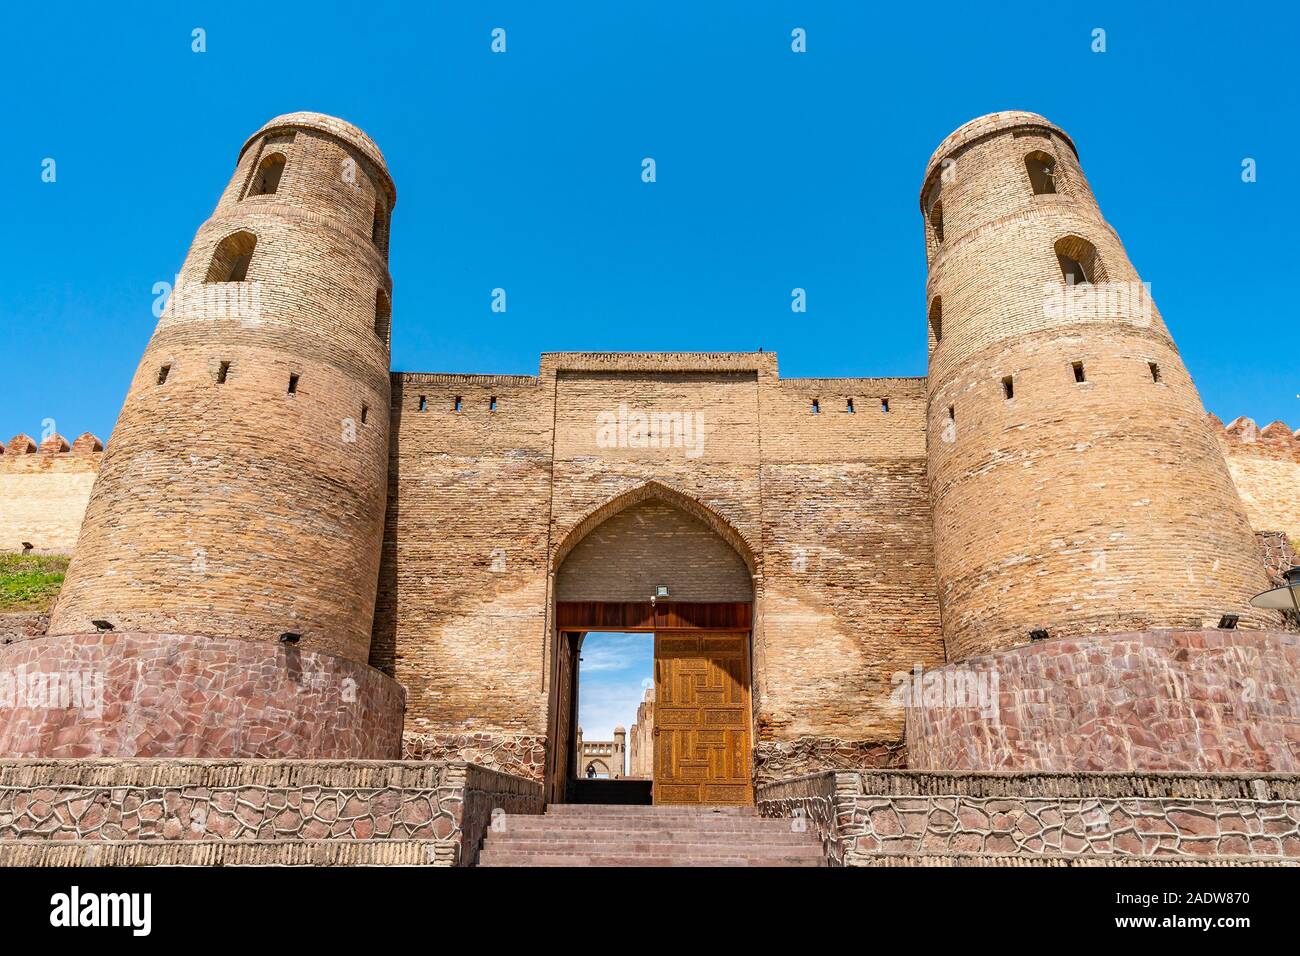 Hisor Fortress Main Gate Entrance Walls Picturesque Breathtaking View on a Sunny Blue Sky Day Stock Photo